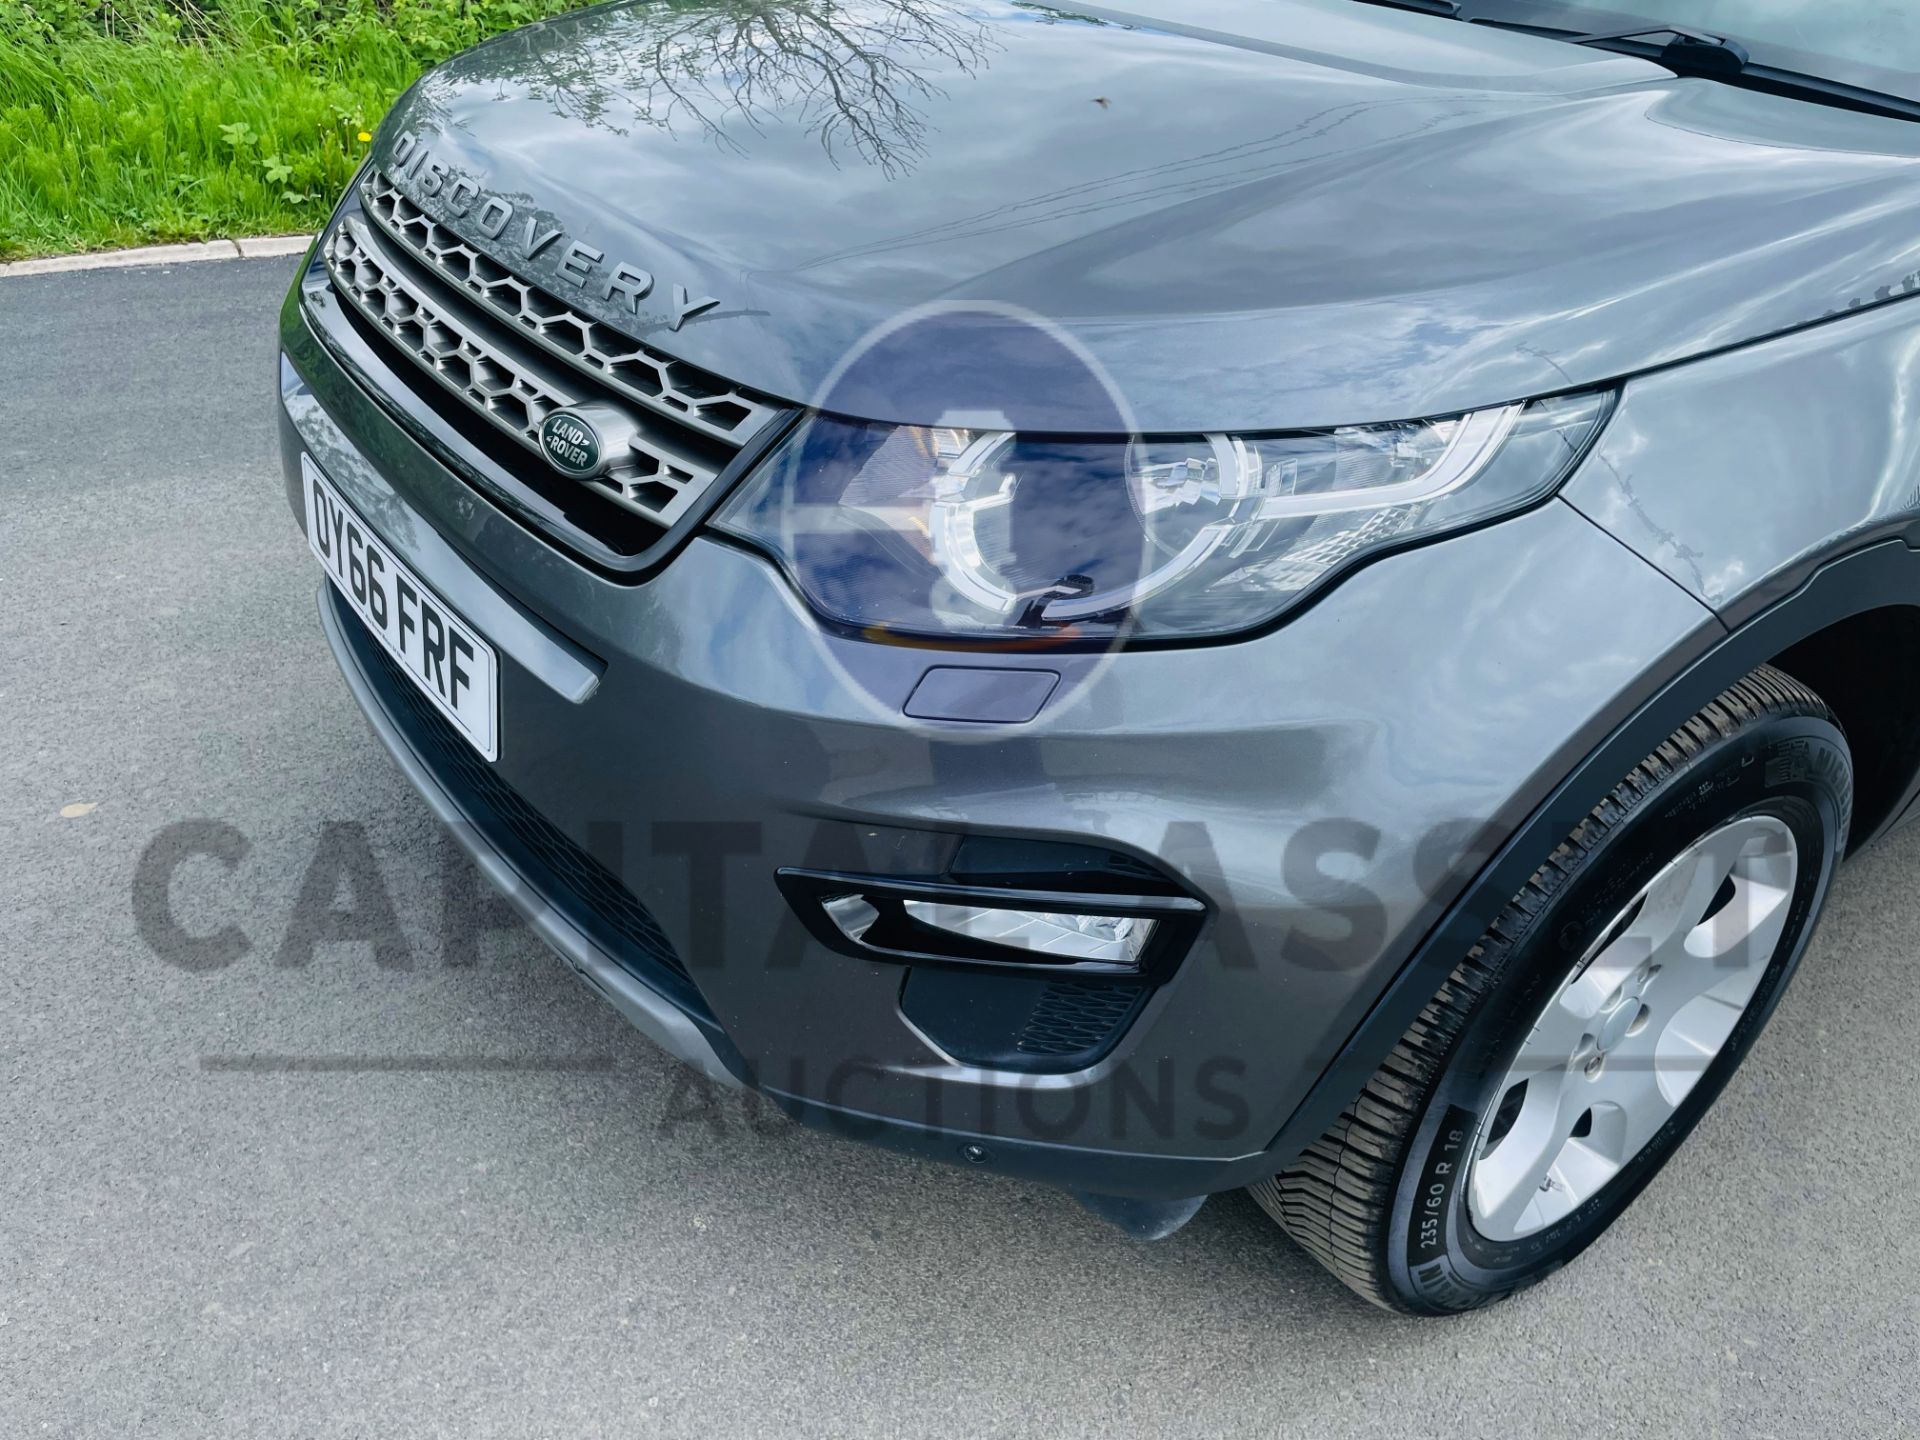 (ON SALE) LAND ROVER DISCOVERY SPORT *SE TECH* SUV (2017 - EURO 6) 2.0 TD4 - AUTO STOP/START(NO VAT) - Image 16 of 51